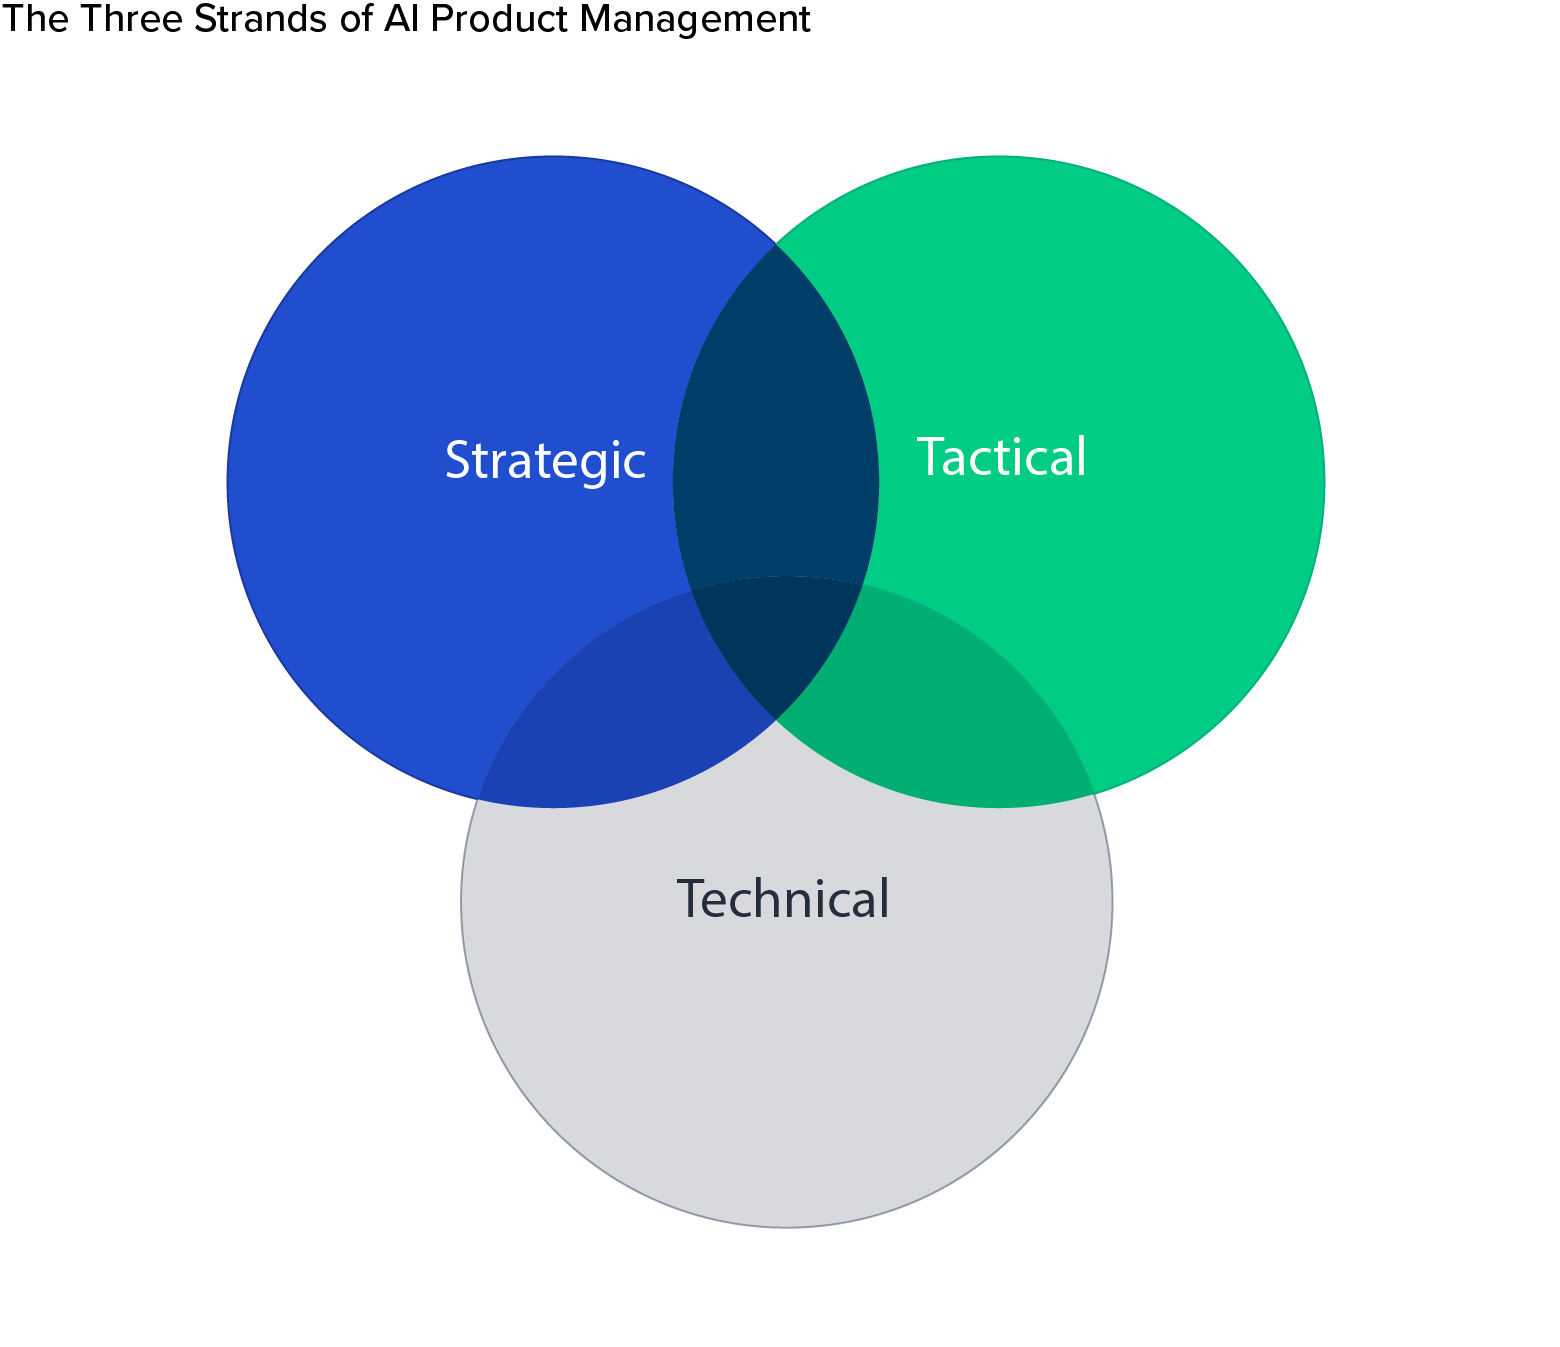 The Three Strands of AI Product Management